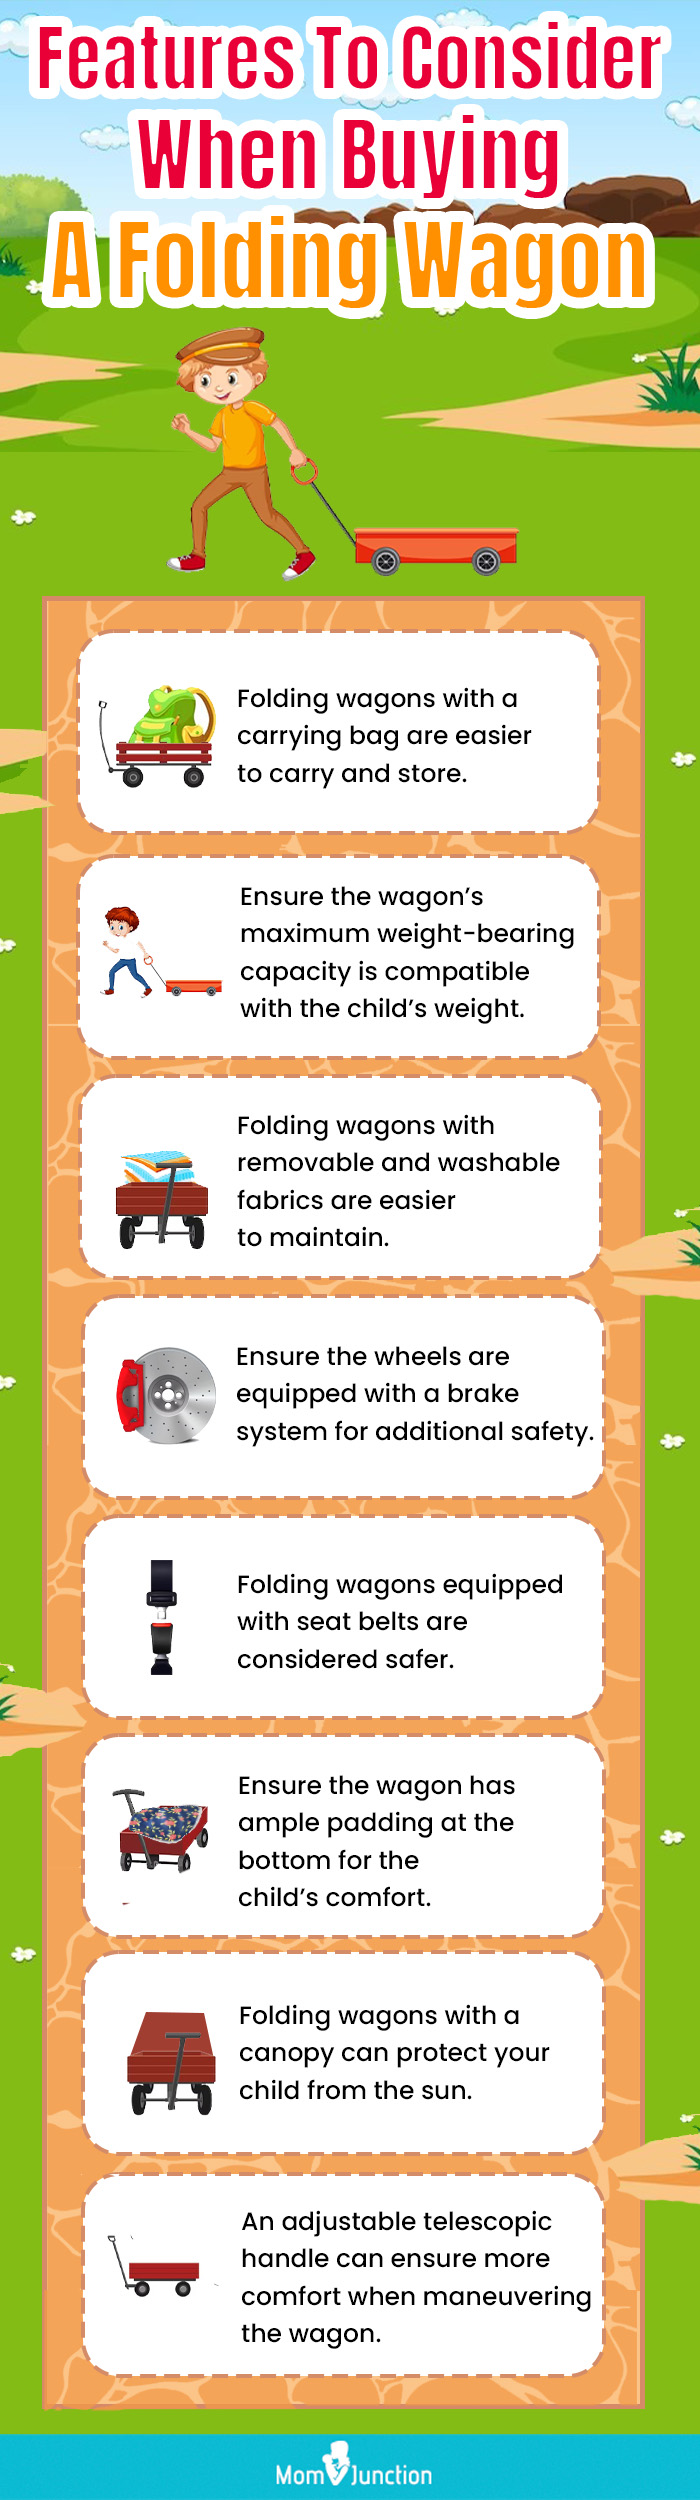 Features To Consider When Buying A Folding Wagon (infographic)